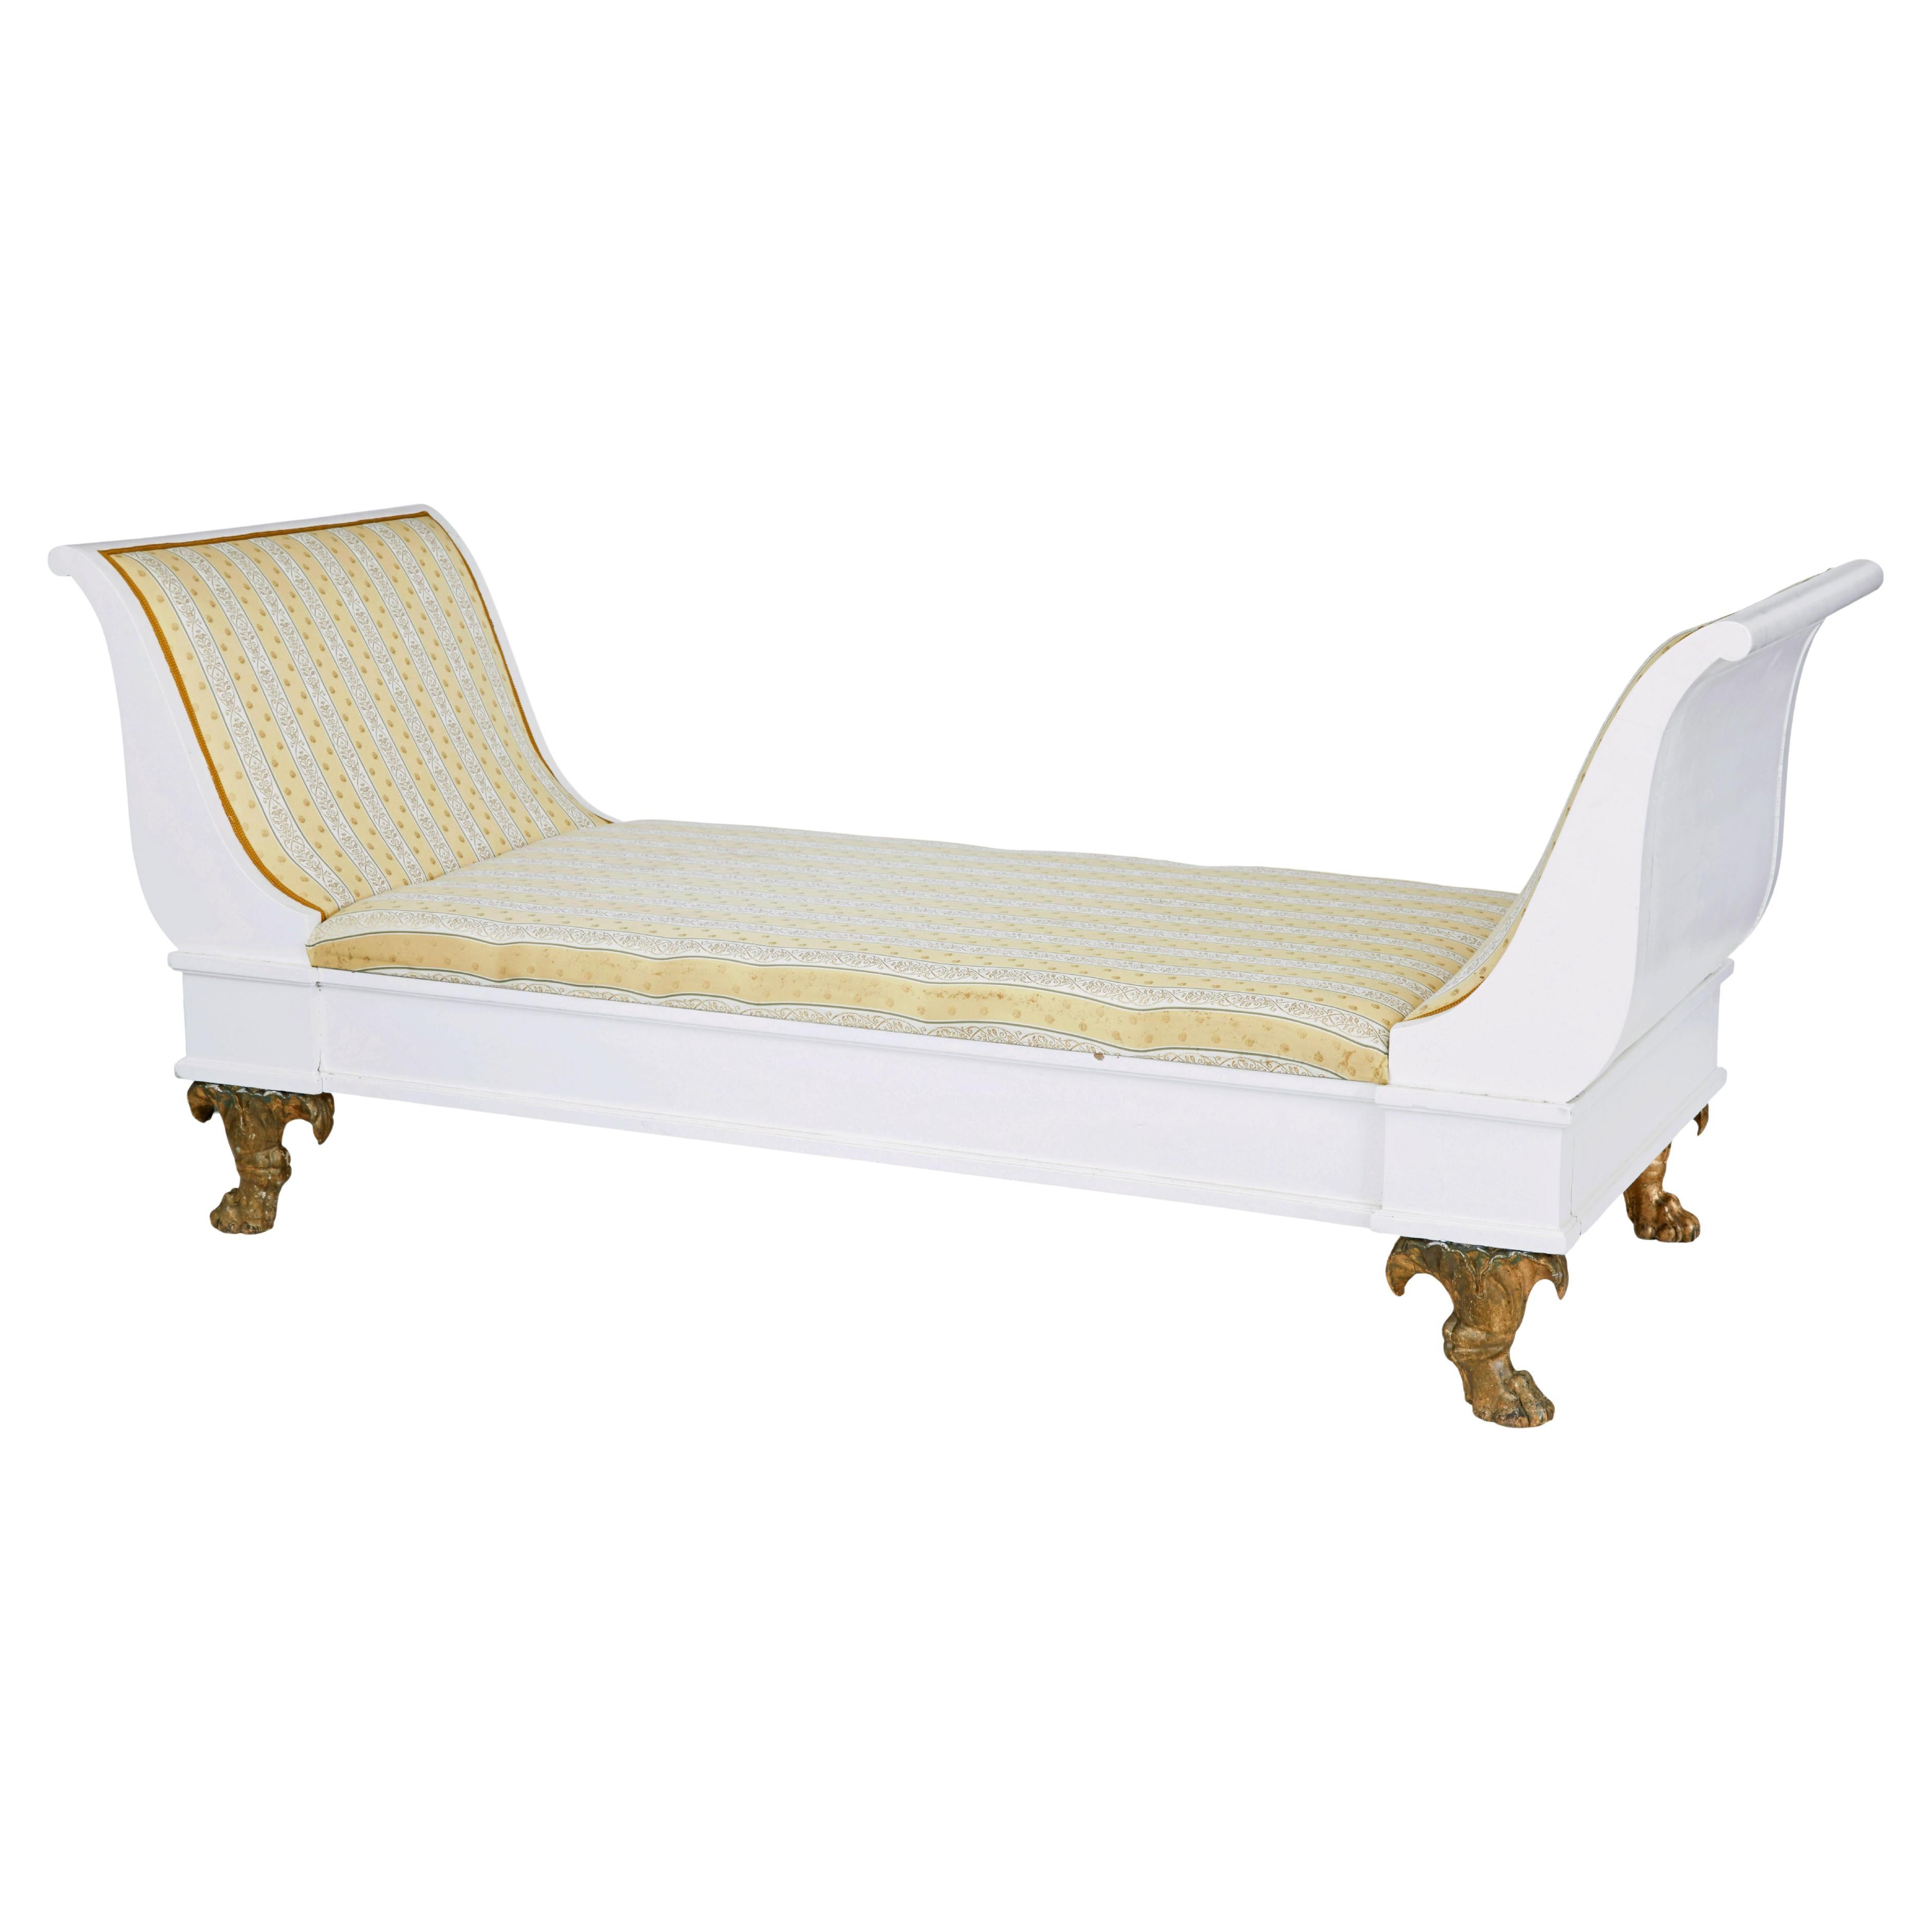 Early 20th Century empire revival painted scandinavian day bed For Sale